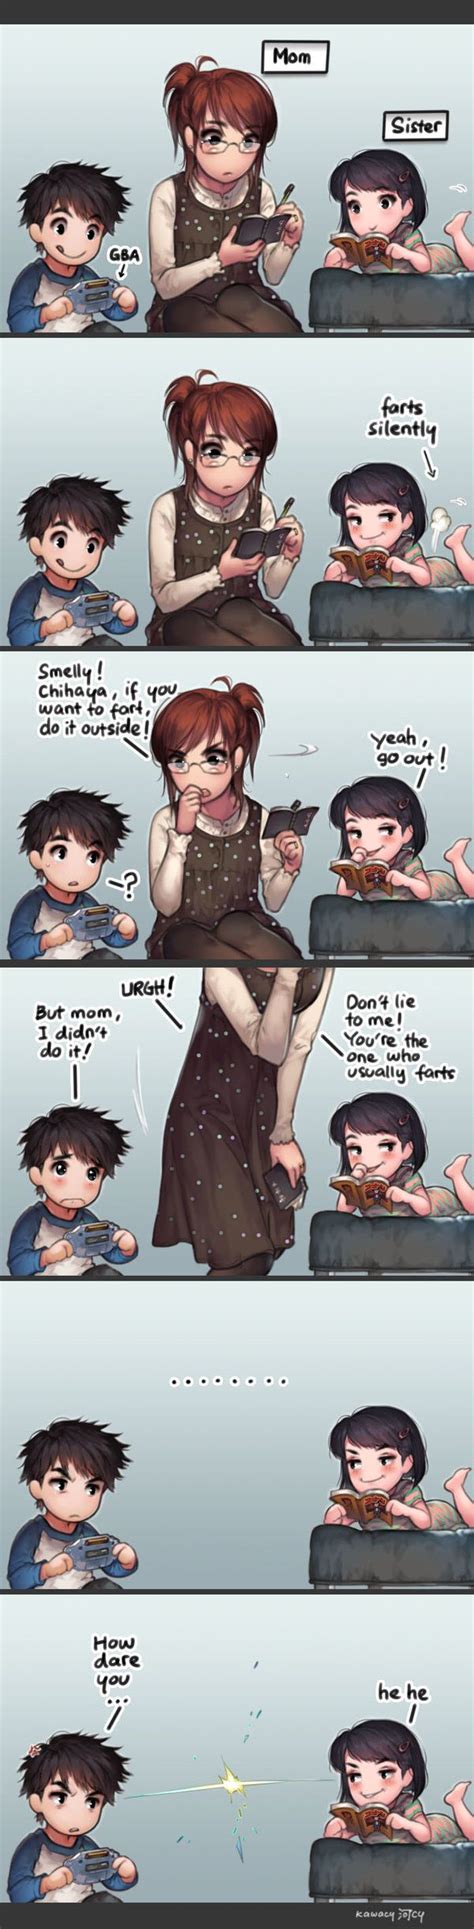 Who The Heck Farted By Kawacy On Deviantart Cute Comics Funny Comics Funny Pictures